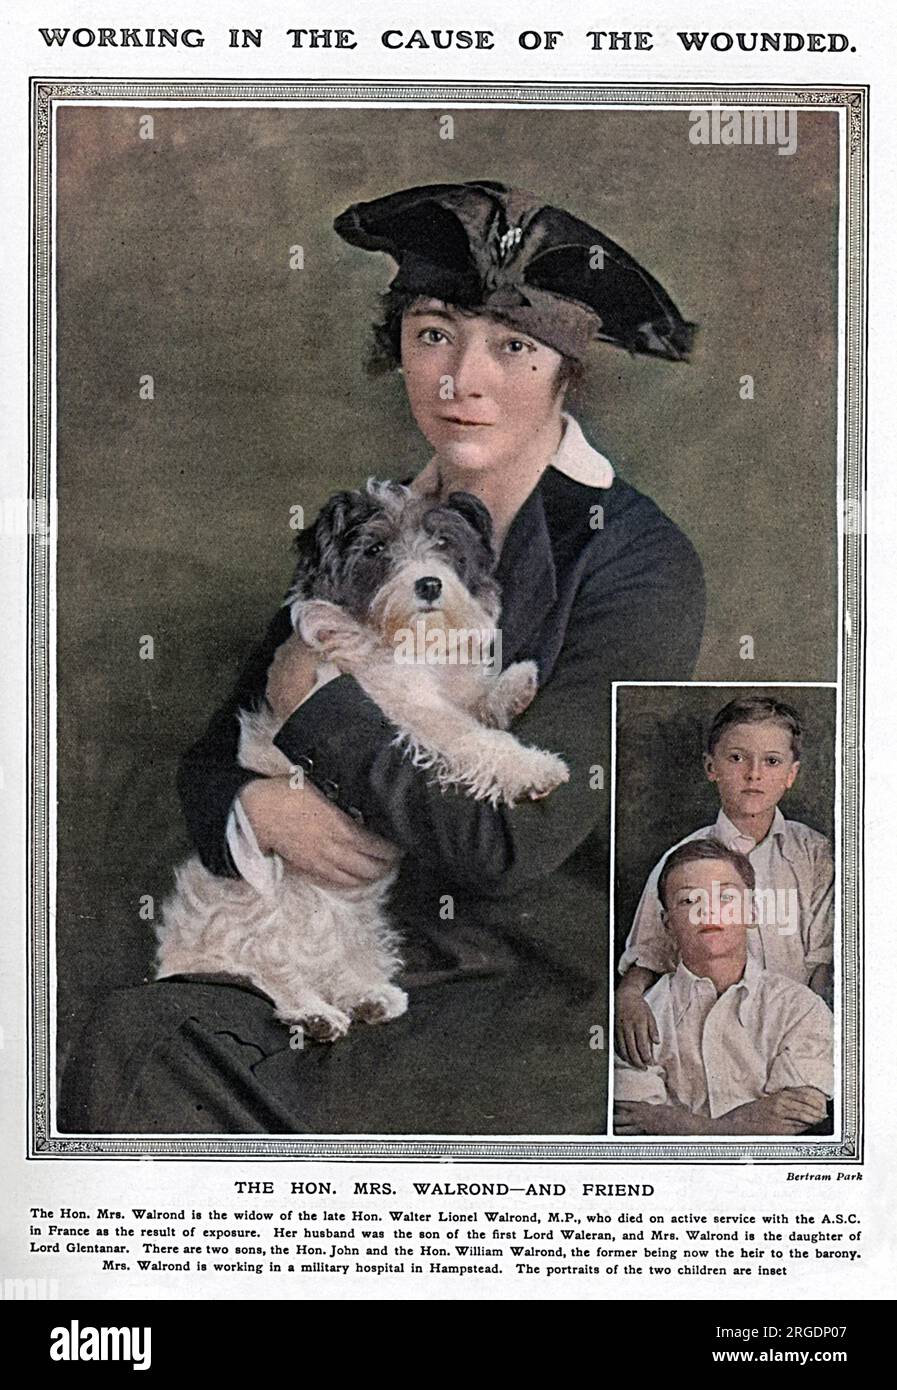 Portrait of the Hon. Mrs Walrond, daughter of Lord Glentanar and widow of the late Hon. Walter Lionel Walrond, M.P. who died on active service with the Army Service Corps in France as a result of exposure. She was working at a military hospital in Hampstead during the war.  Inset photograph shows her two sons, John and William Walrond. Stock Photo